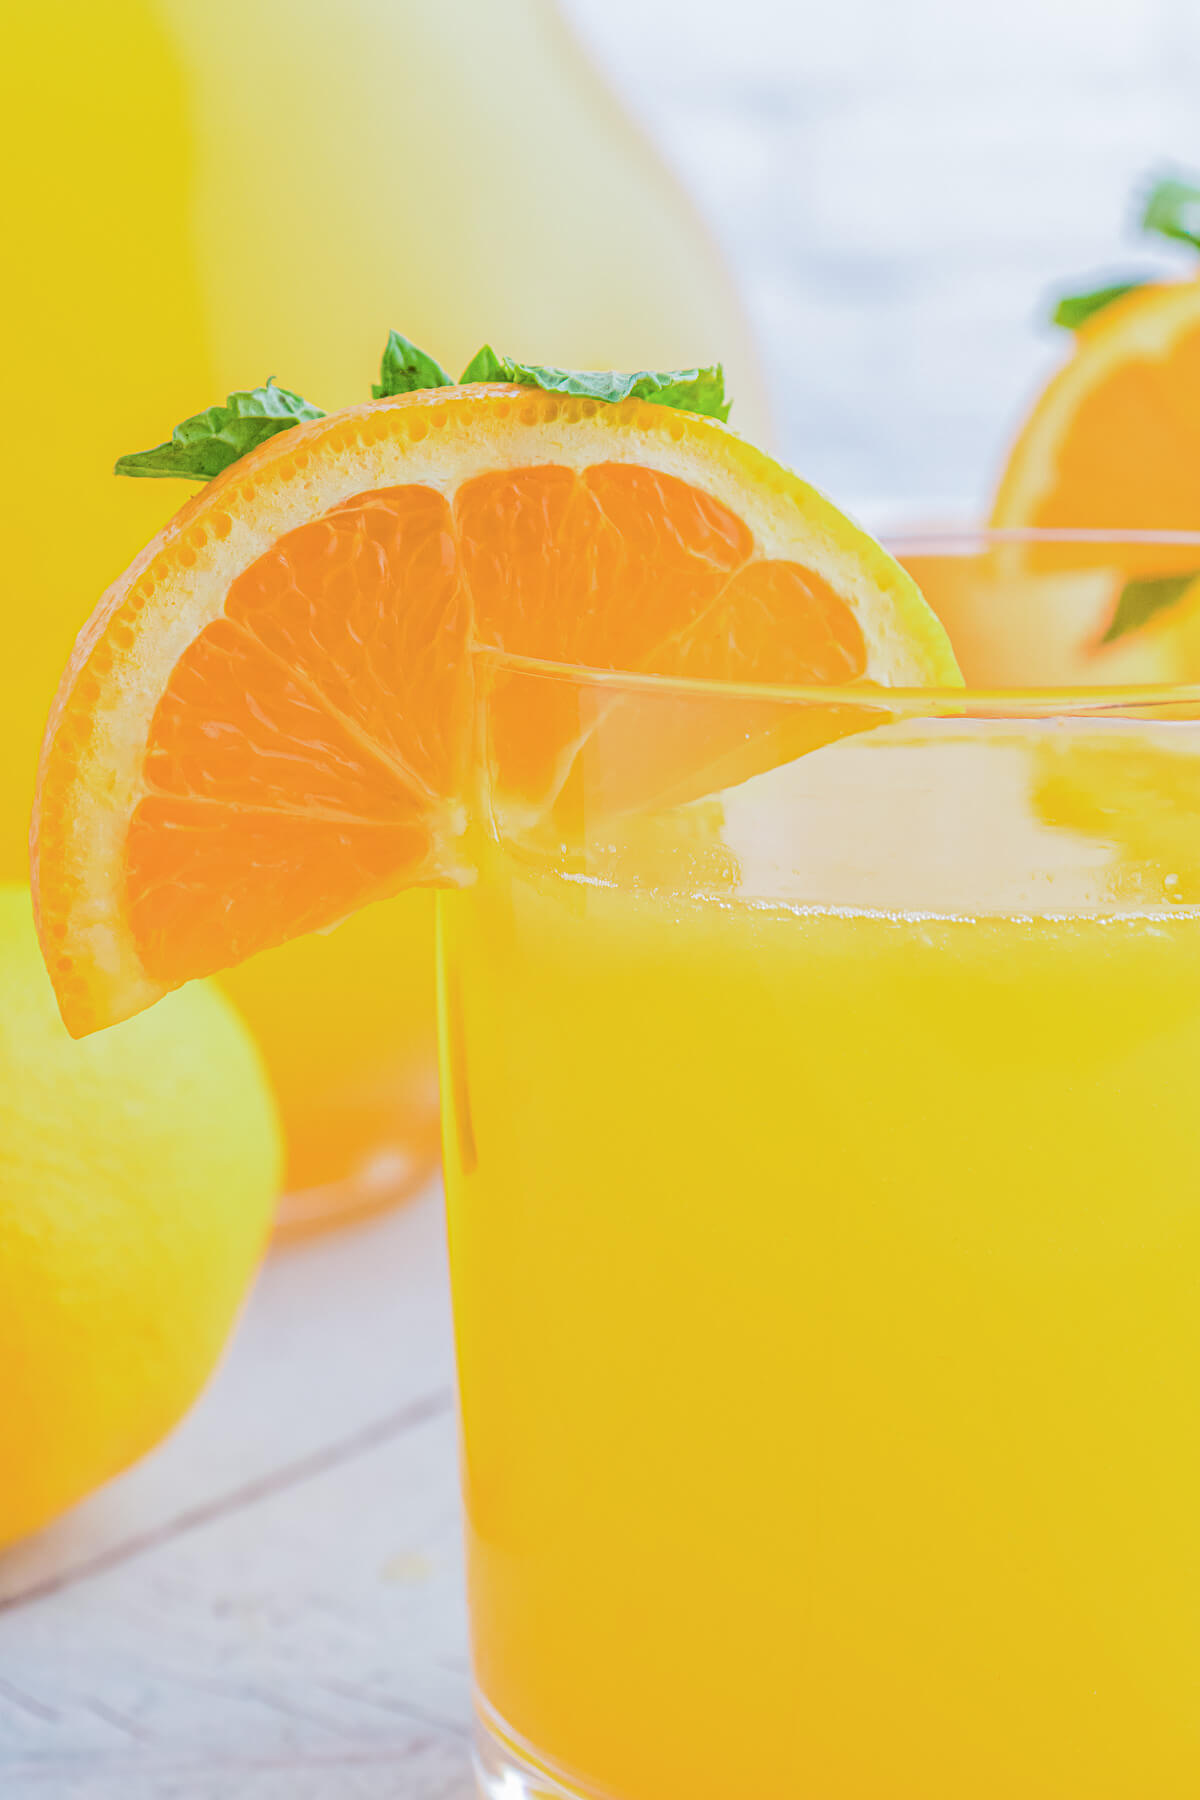 A glass of bright homemade orangeade garnished with orange wheels and green sprigs of fresh mint.